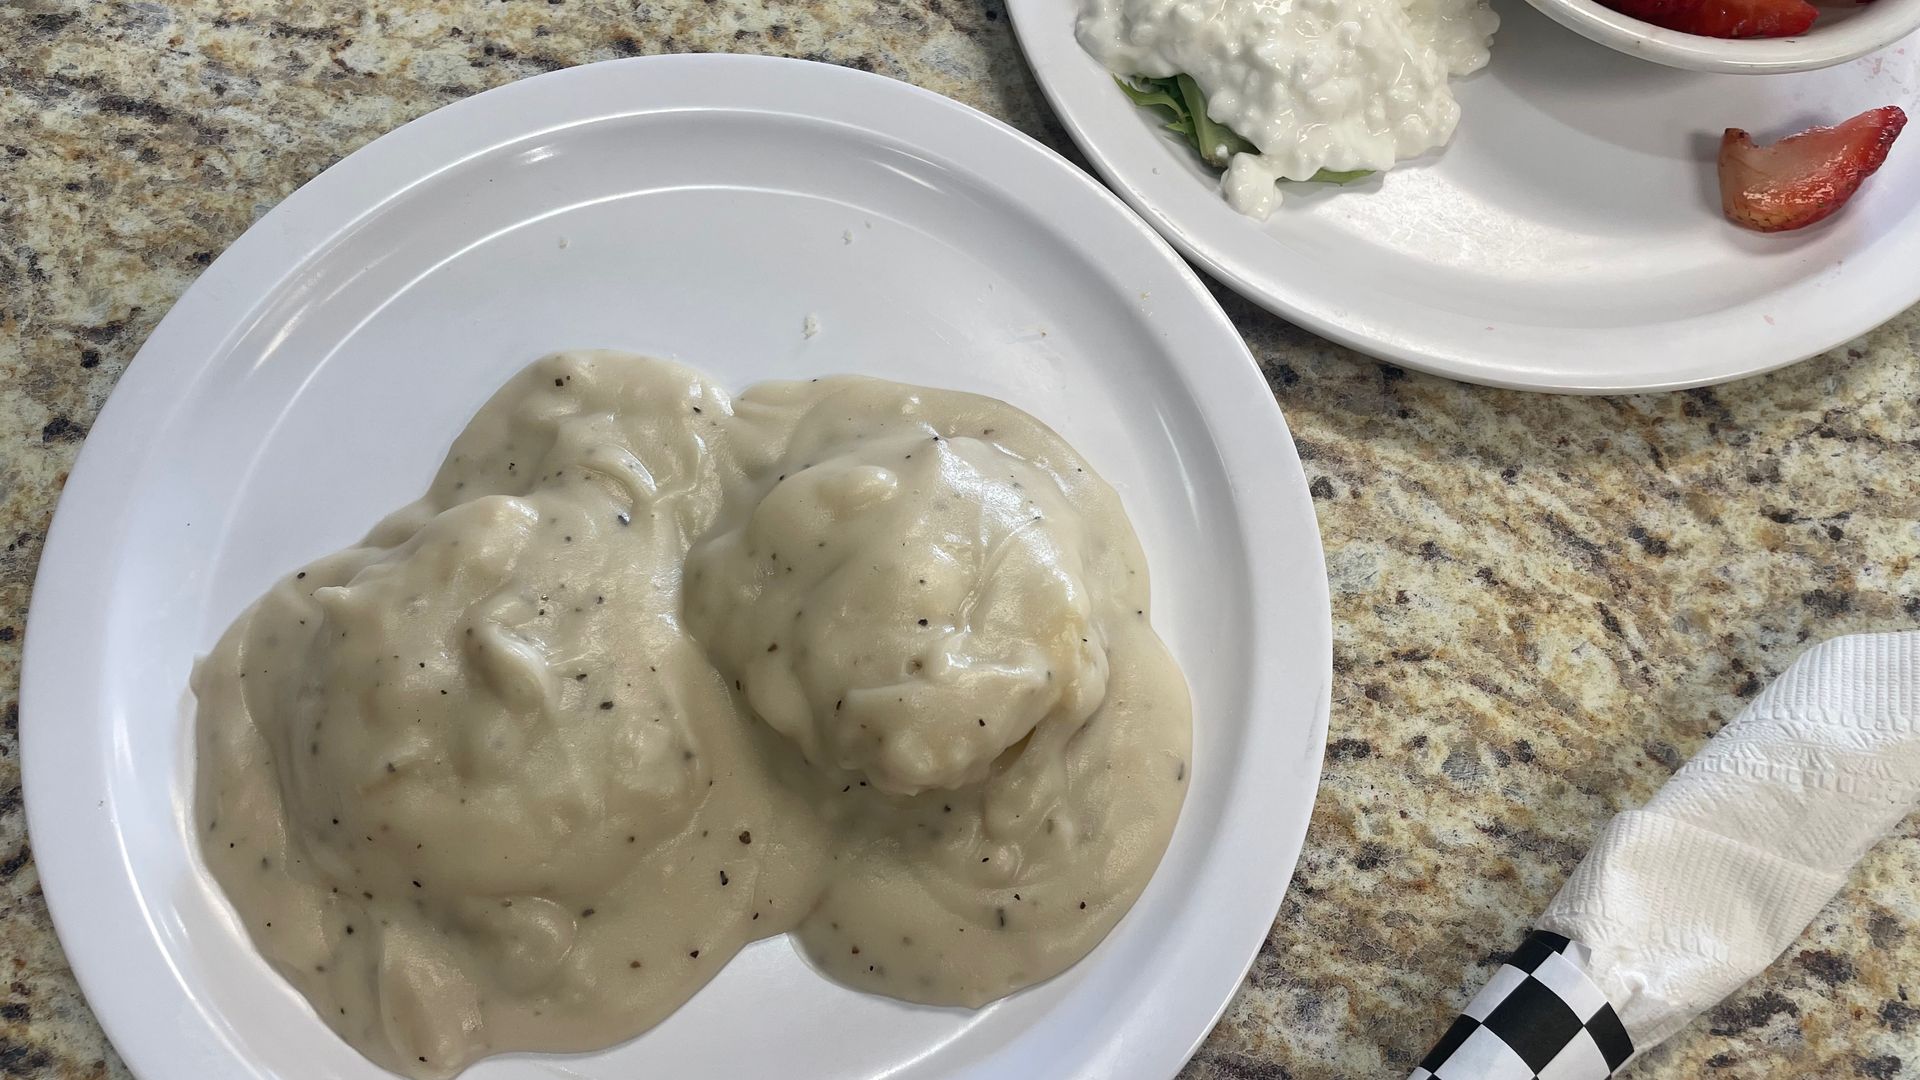 A plate with a biscuit covered in gravy